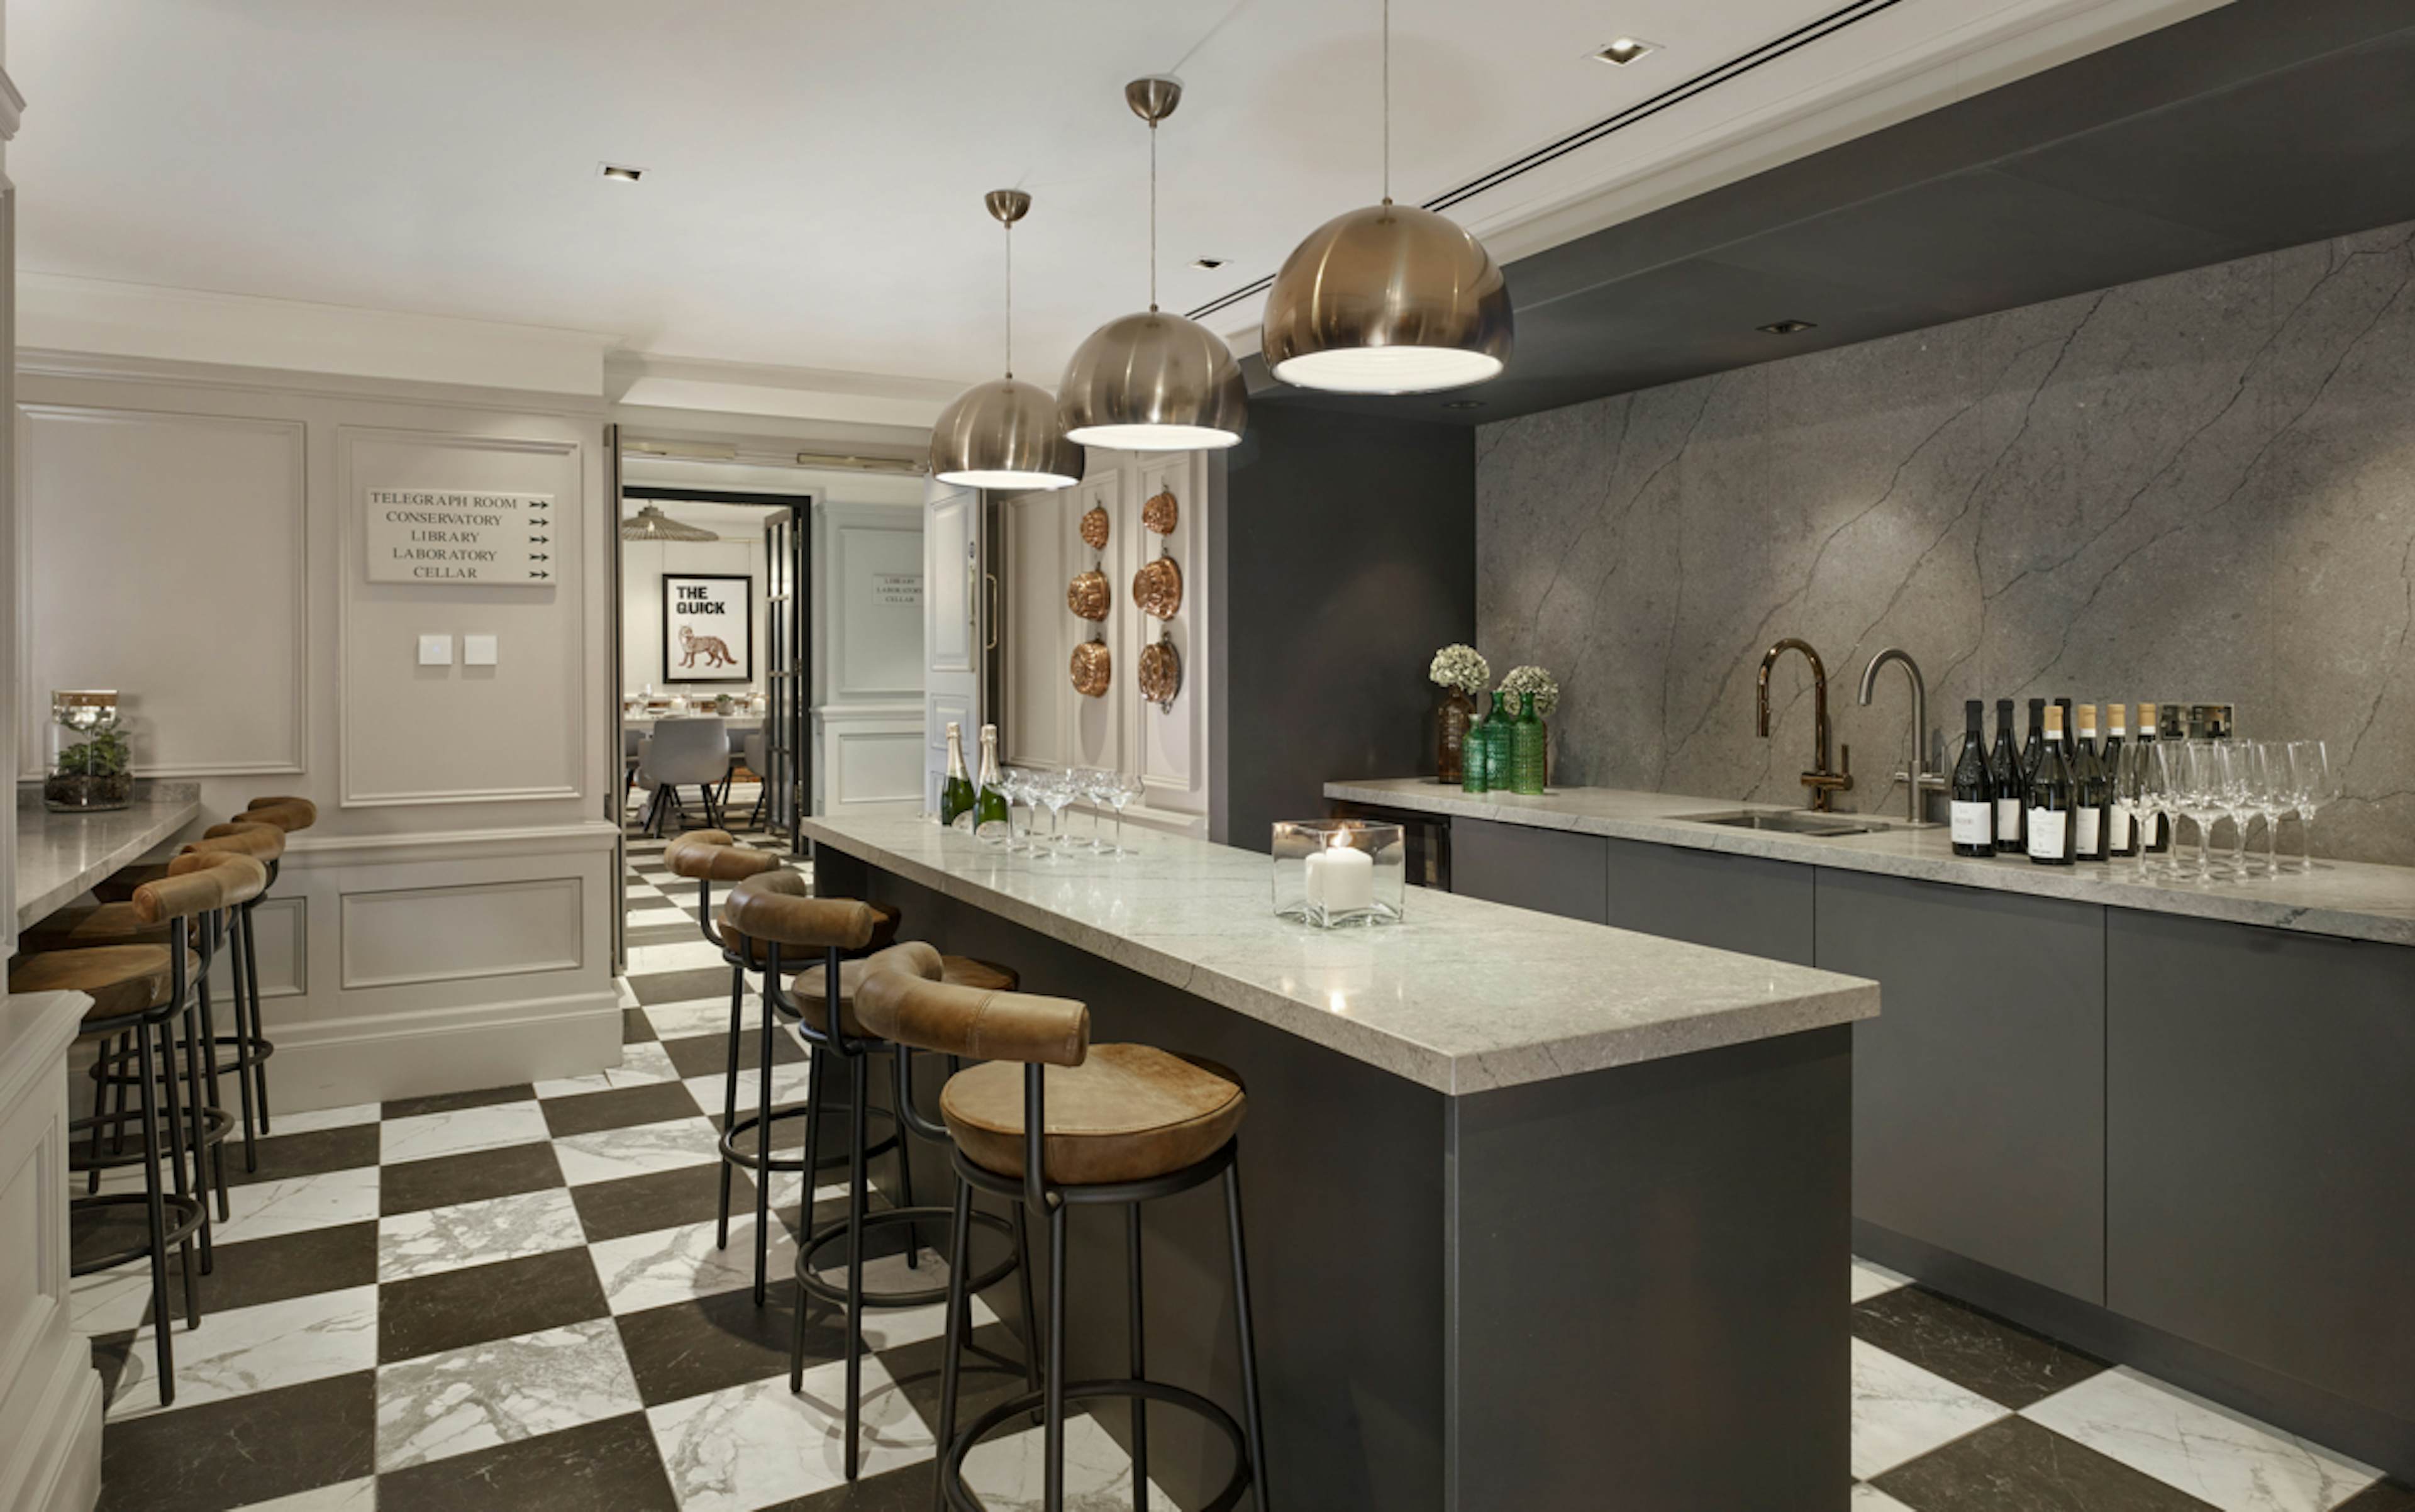 The Residence at Holmes Hotel London - The Residence image 1